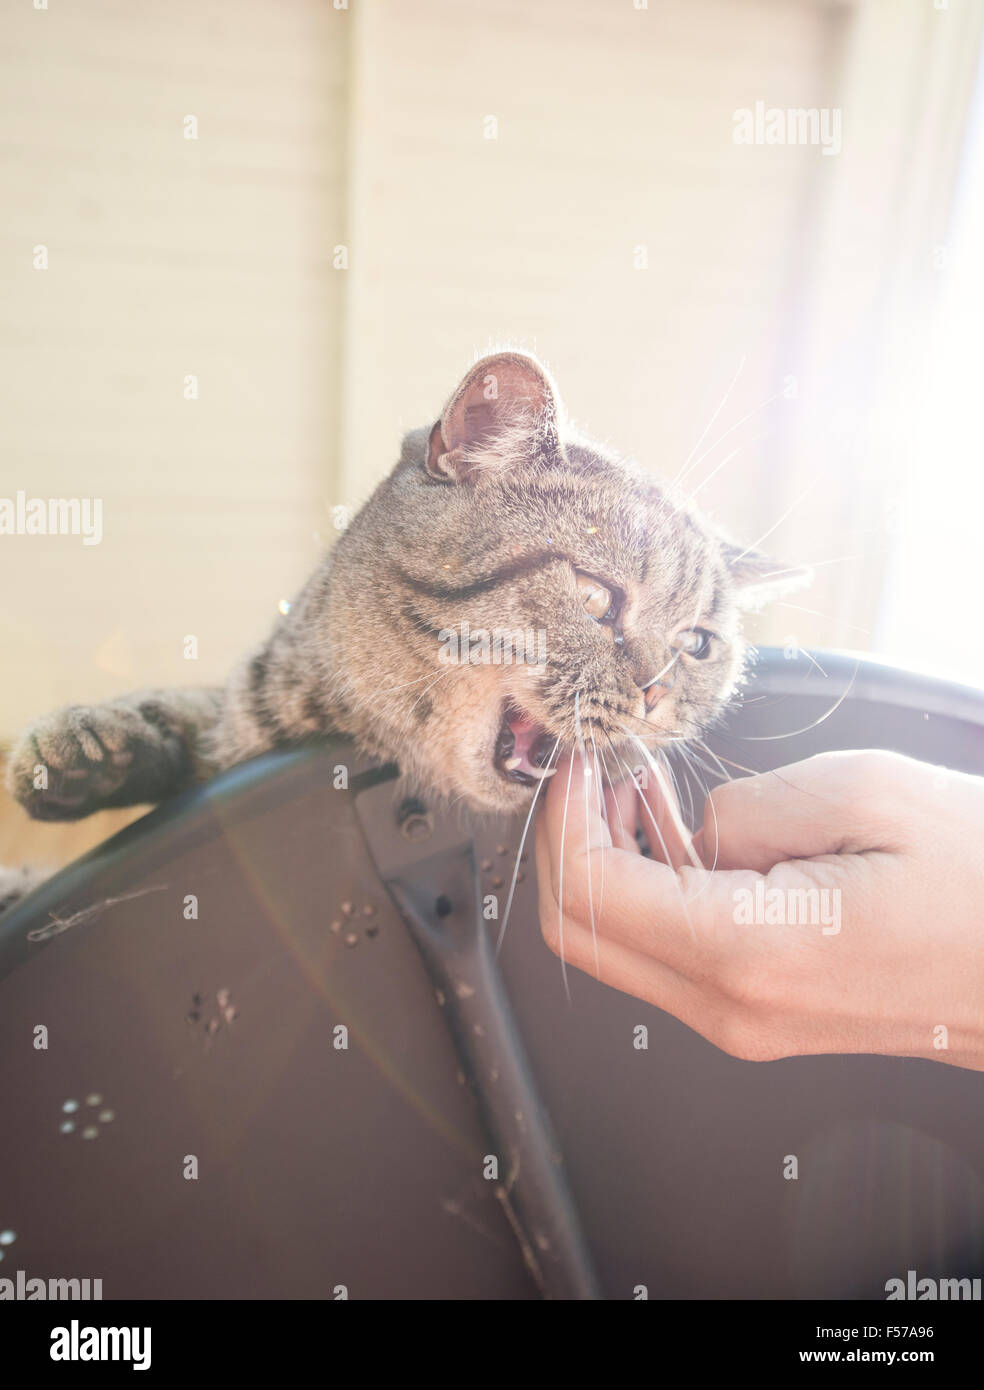 British shorthair cat lying on table biting on human hand. Playful pet on adventure and full of mischief. Stock Photo